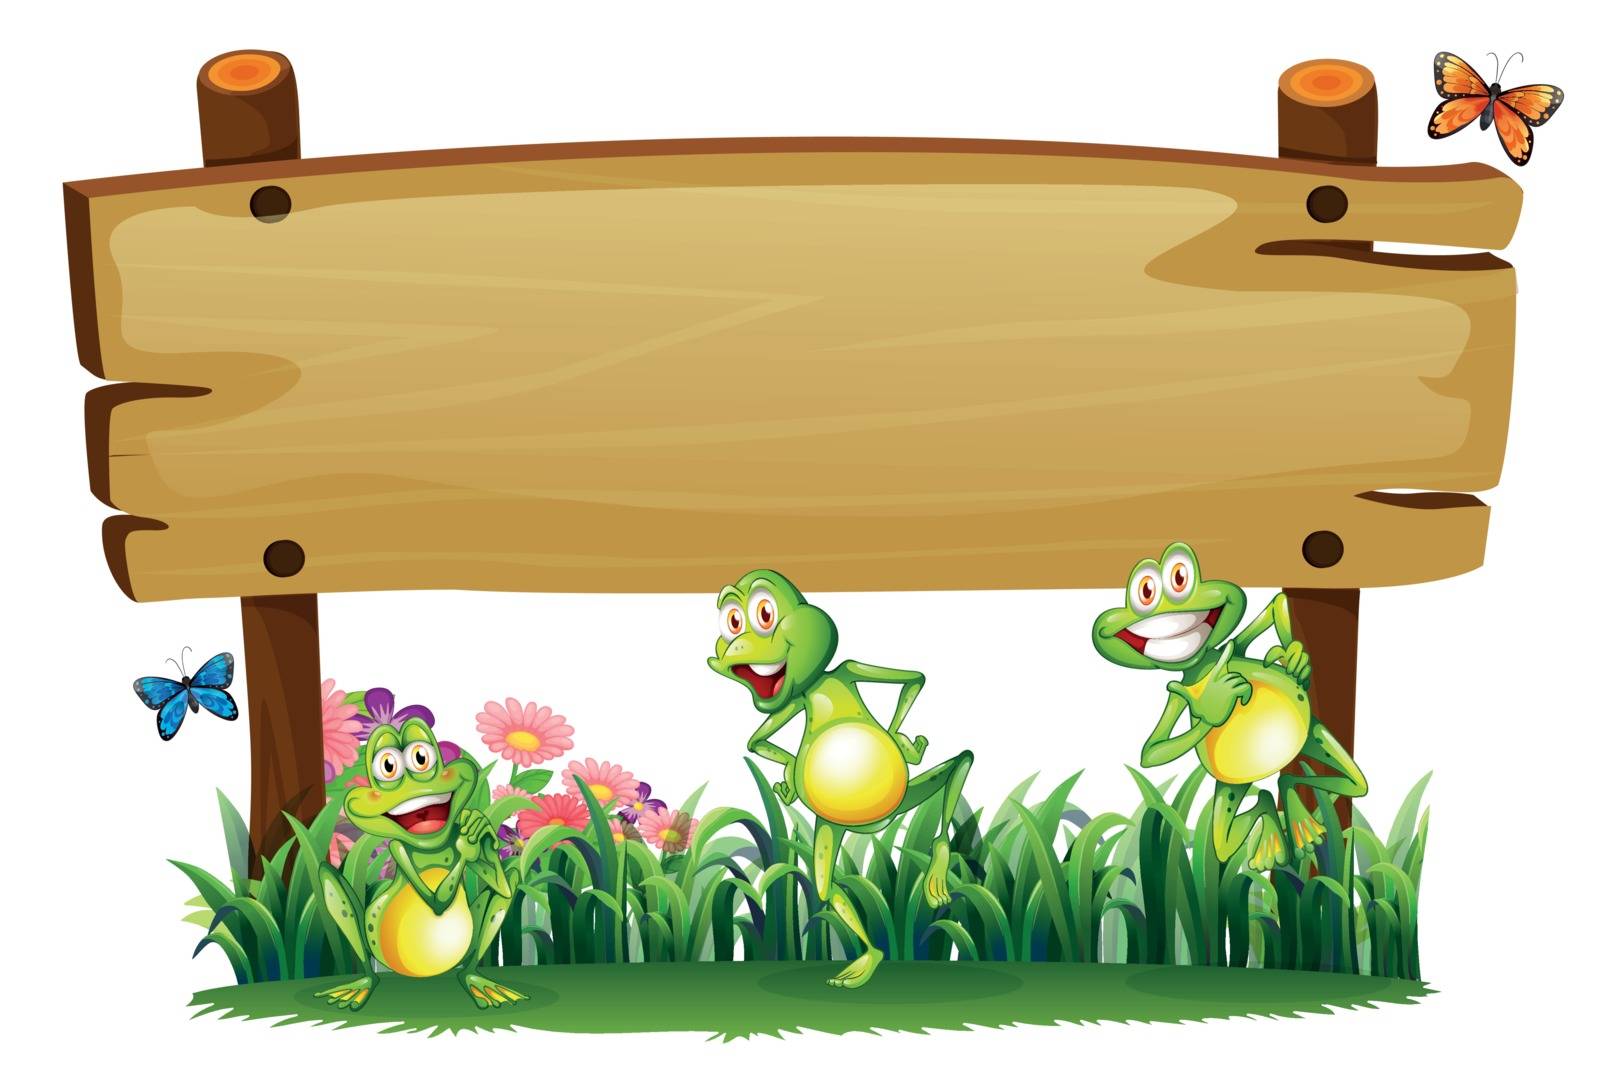 An empty wooden board at the garden with playful frogs by iimages